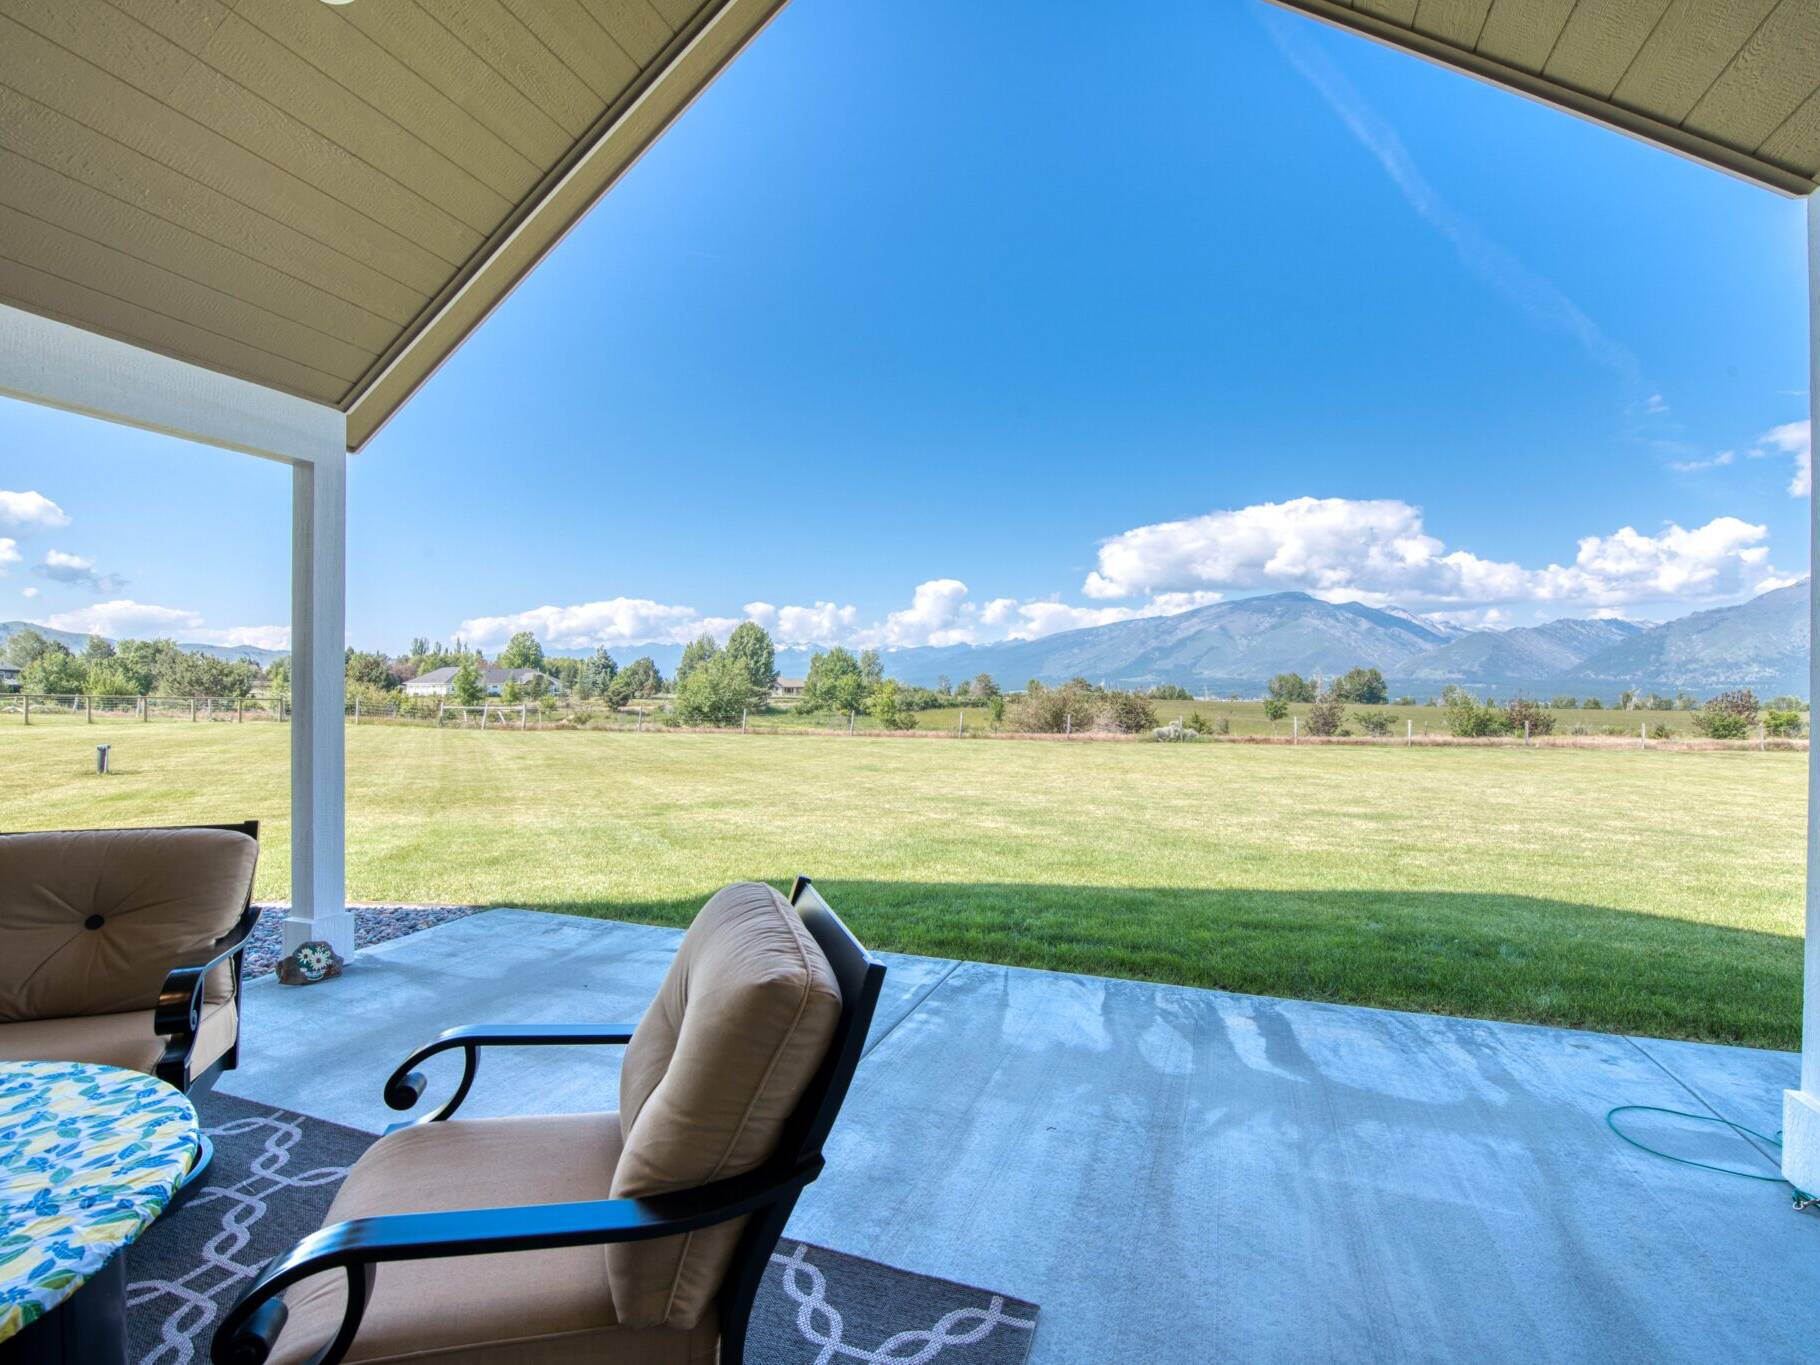 Covered back patio with vaulted ceiling overlooking the Bitterroot Valley near Hamilton, MT - Built by Big Sky Builders of Montana